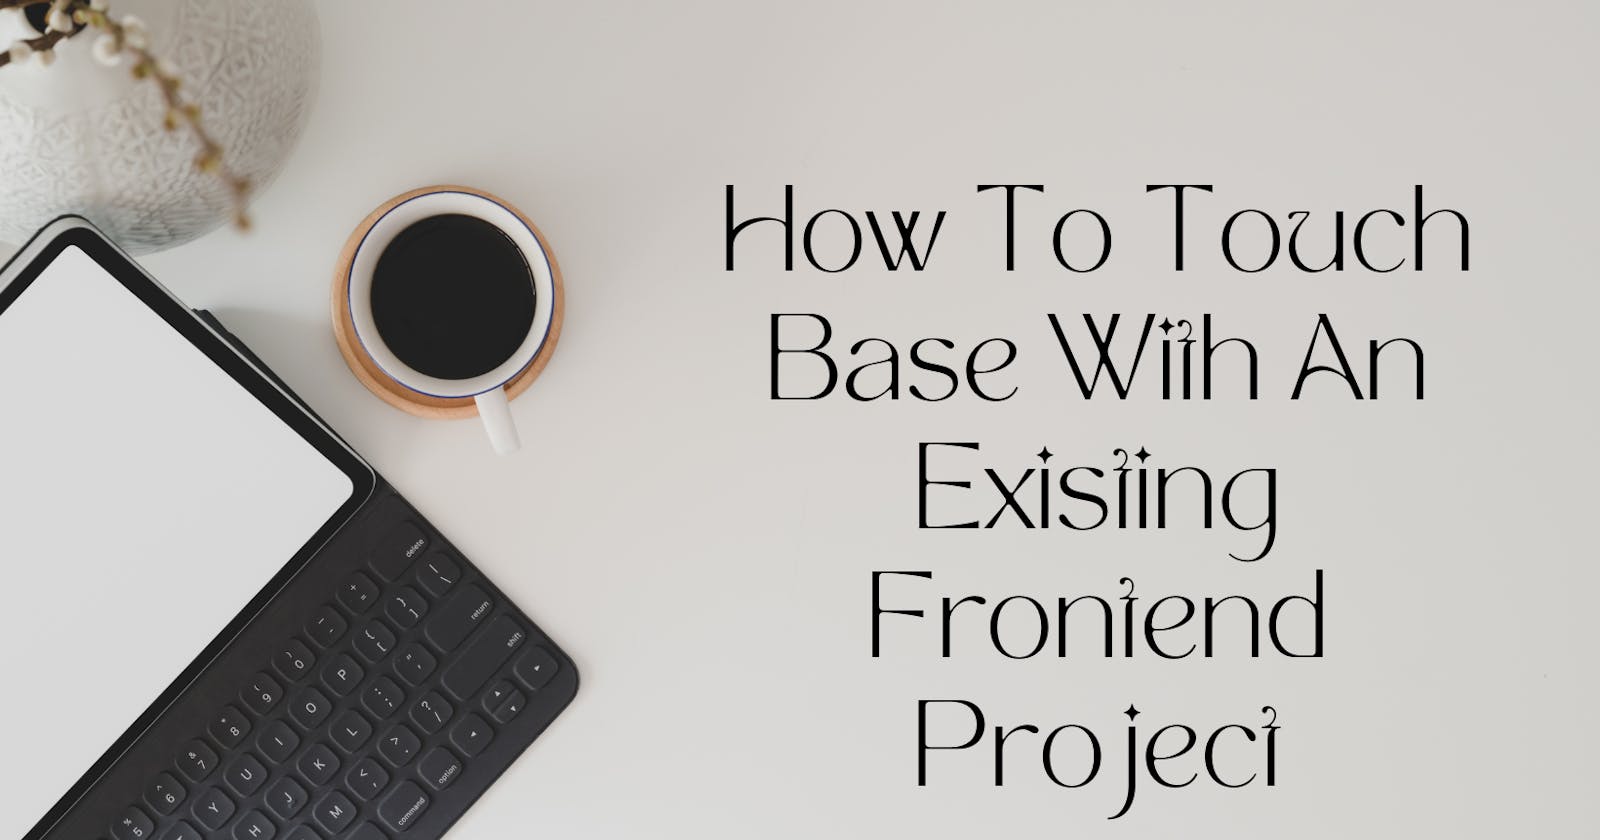 How To Touch Base With An Existing Frontend Project